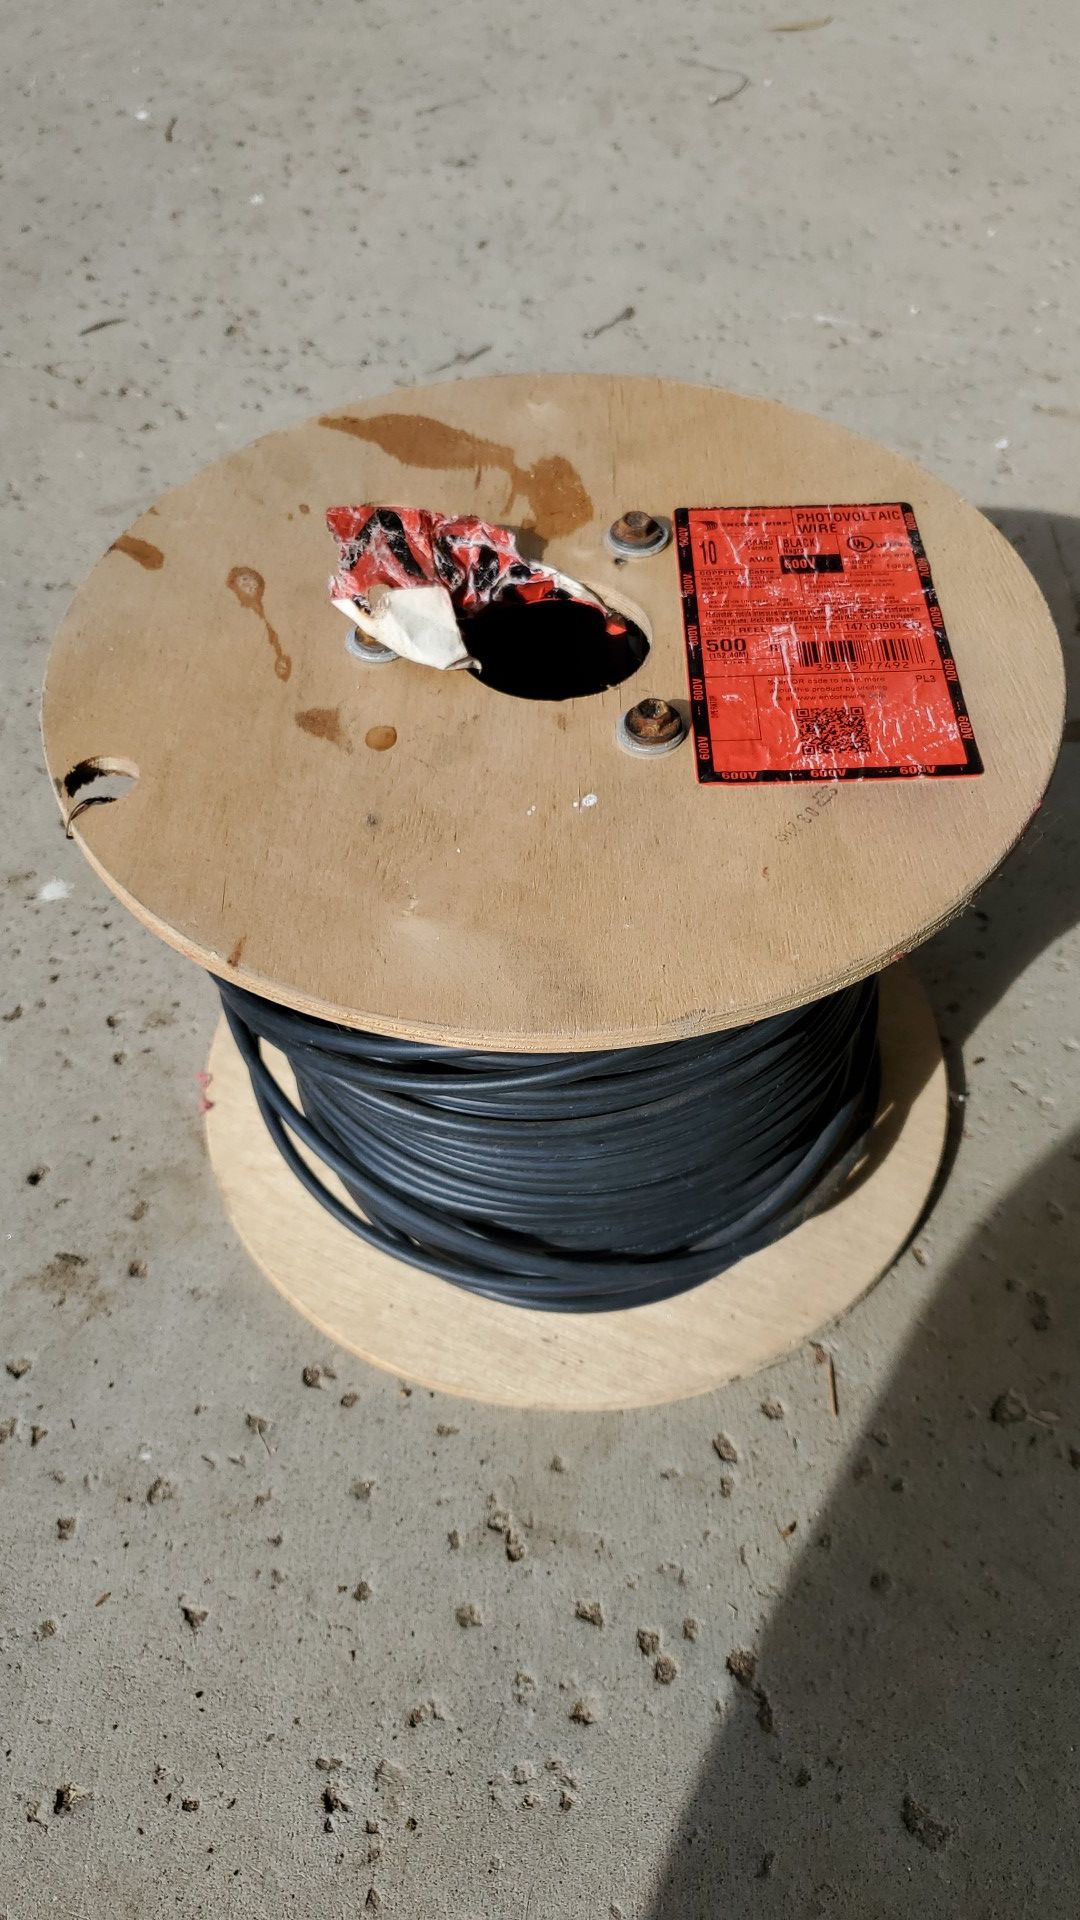 10 awg PV wire for solar system